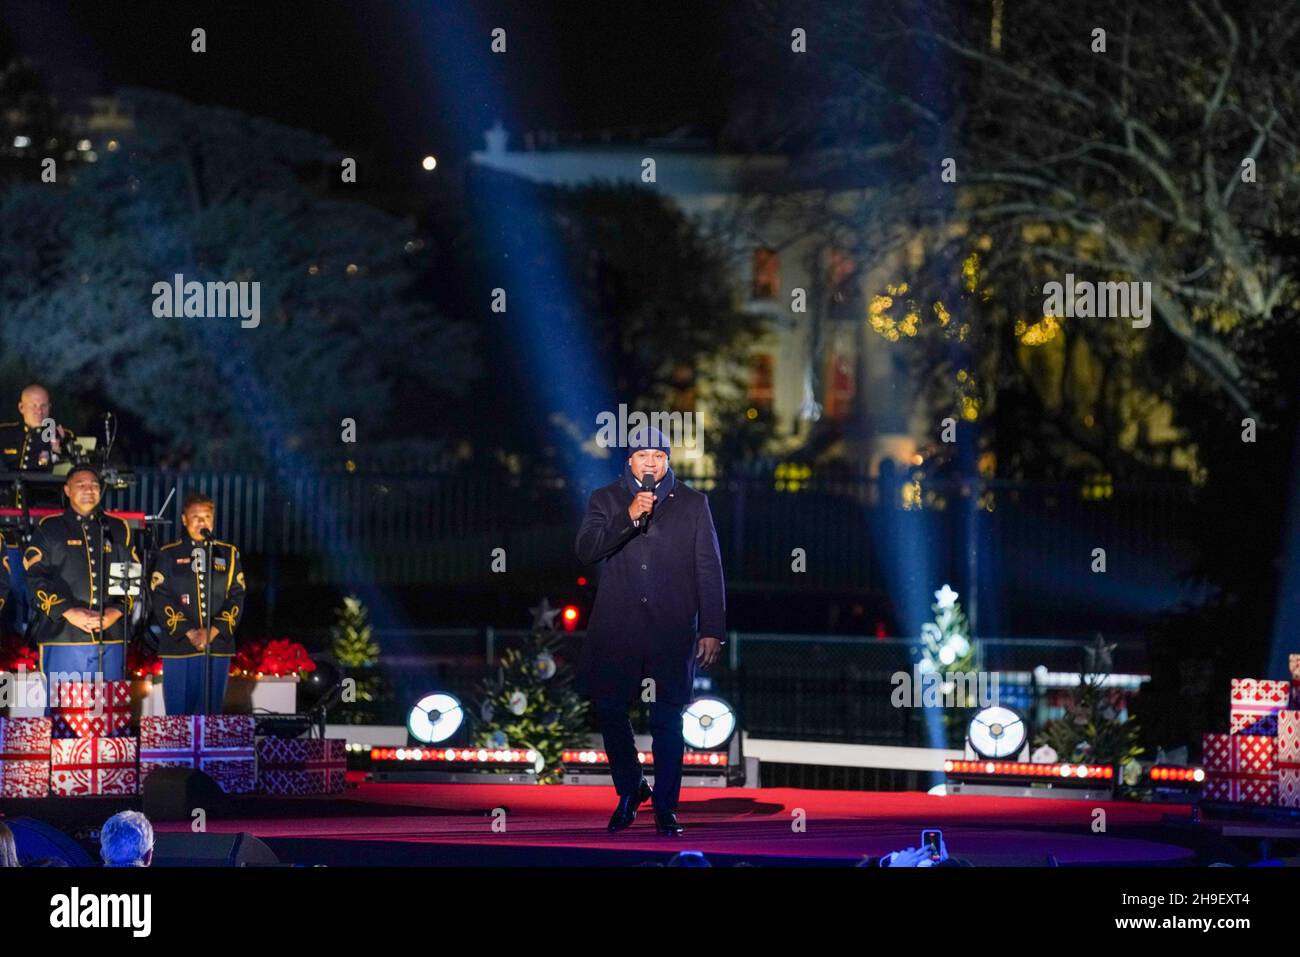 Washington, United States of America. 02 December, 2021. Rapper and emcee LL Cool J onstage during the 99th lighting of the National Christmas Tree ceremony on the Ellipse, December 2, 2021 in Washington, D.C.  Credit: Tami A. Heilemann/U.S. Interior Department/Alamy Live News Stock Photo